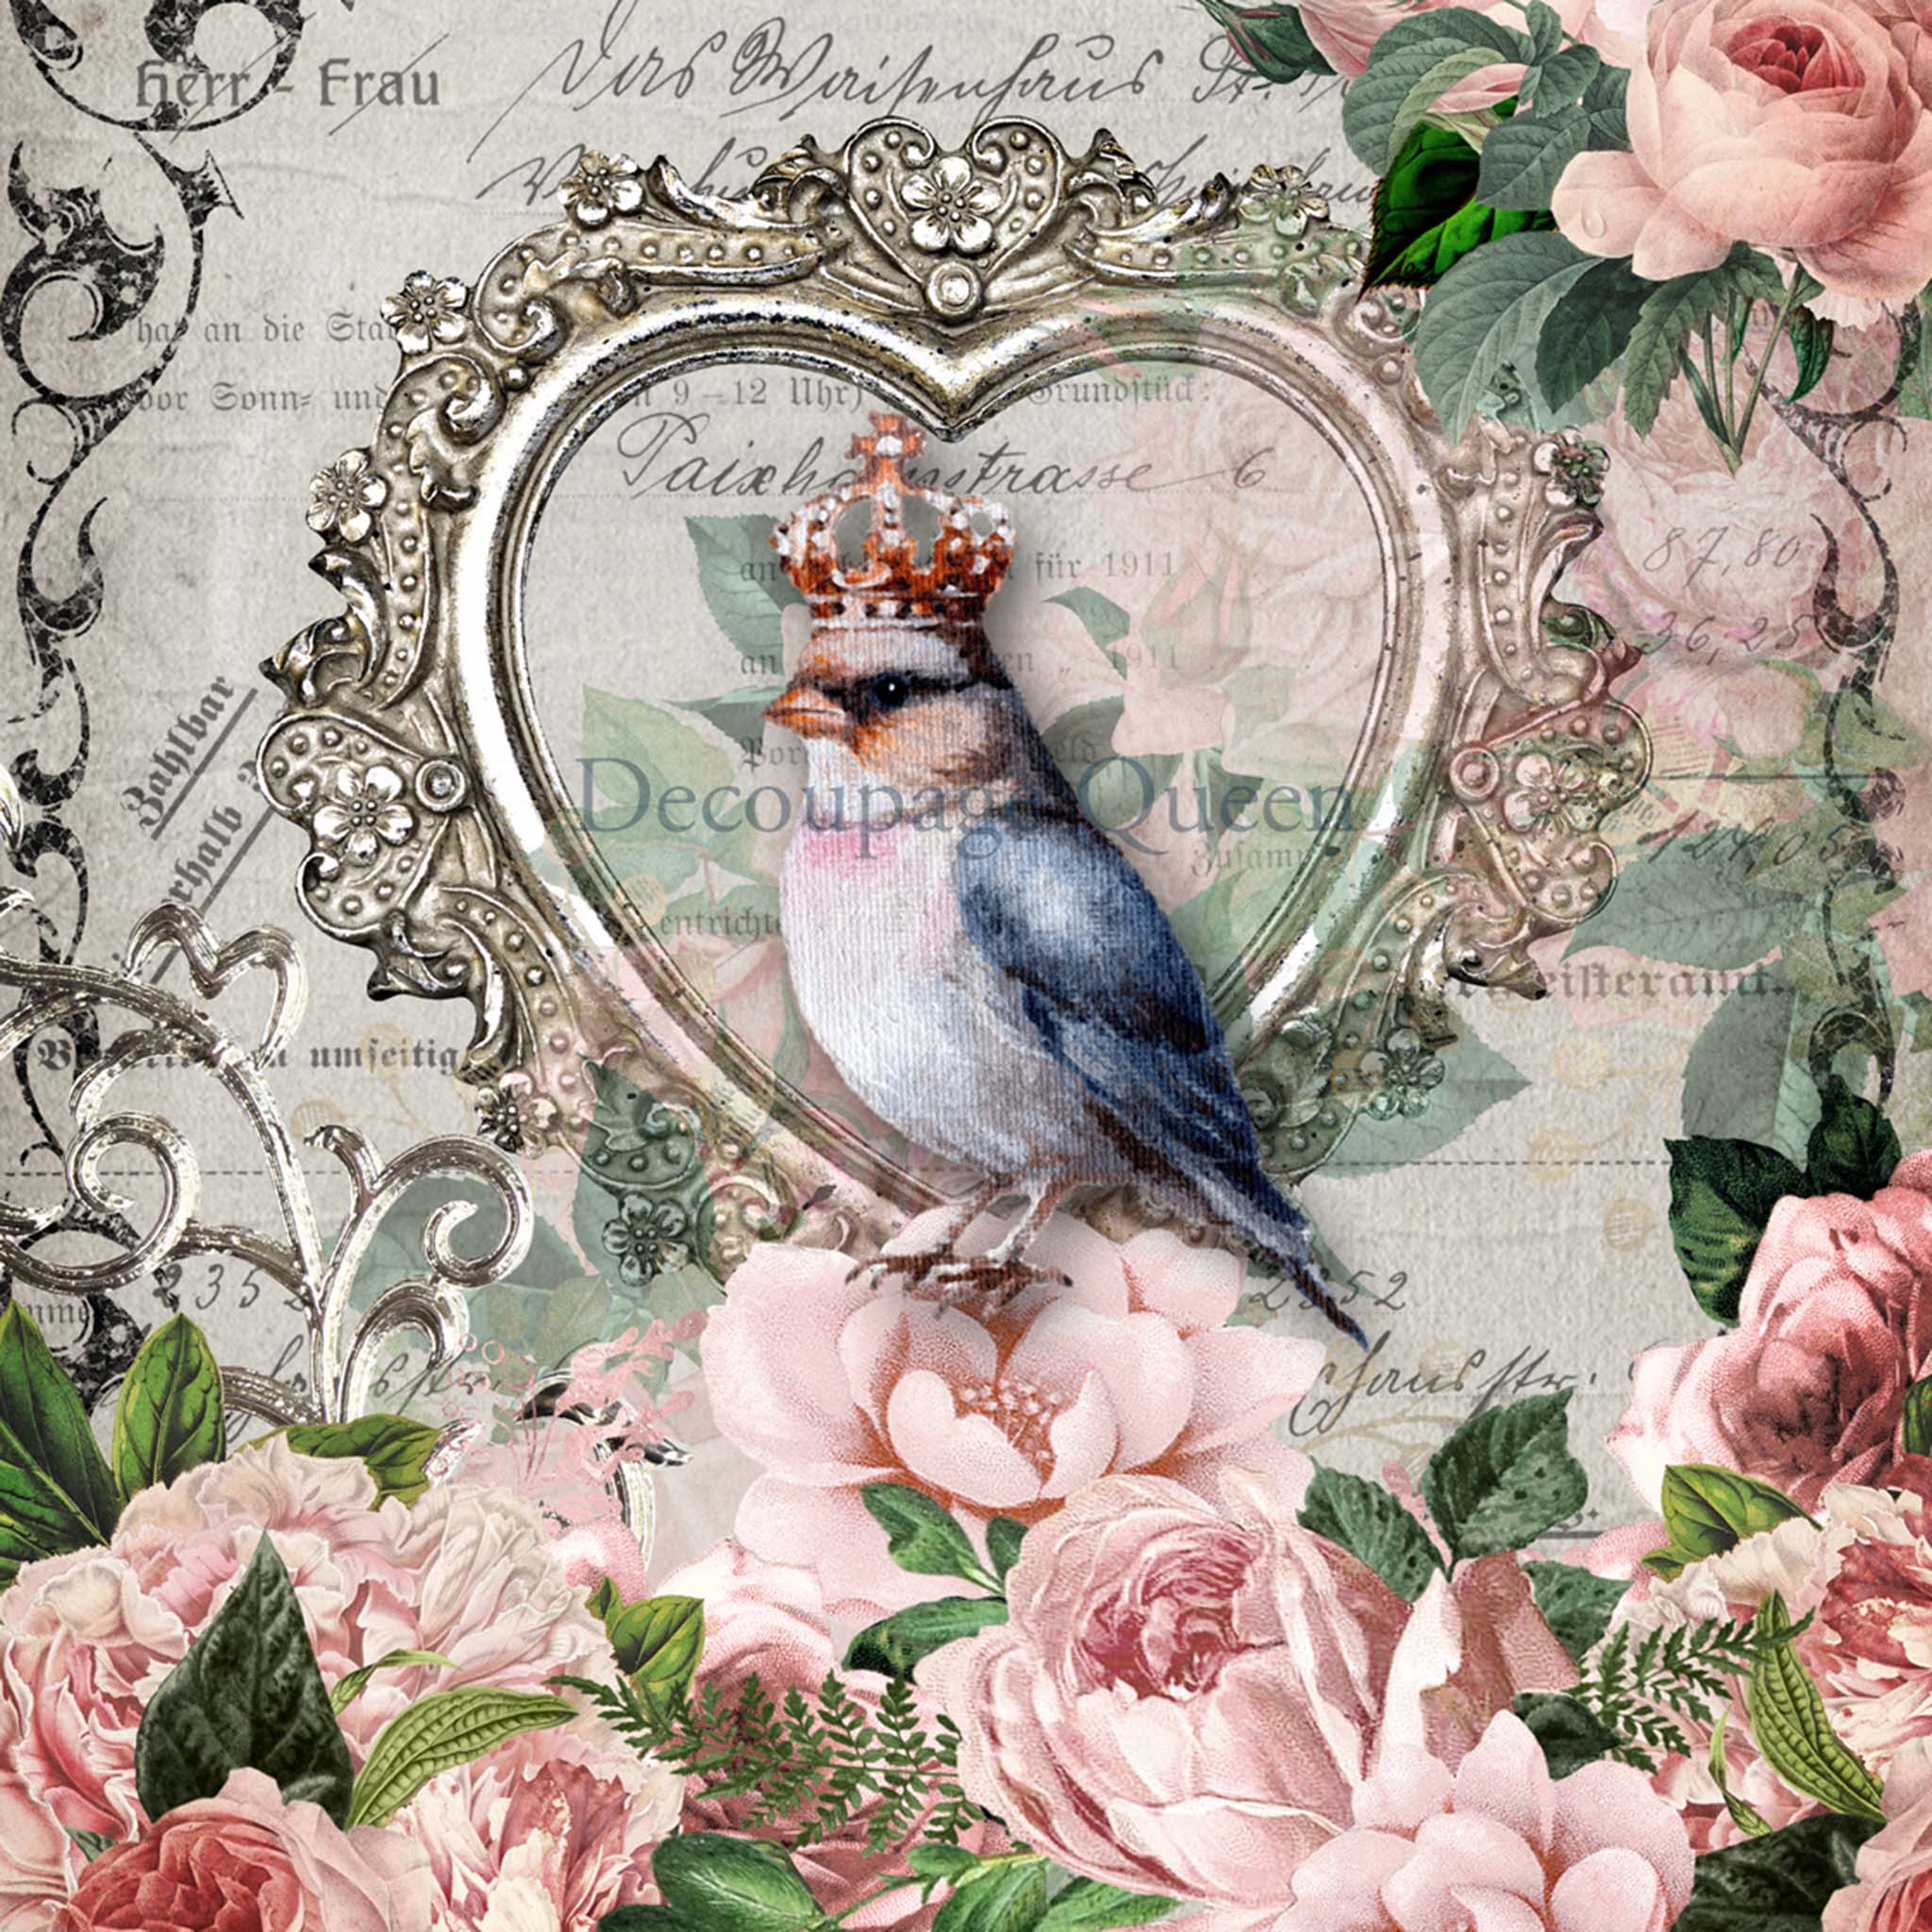 Close-up of an A1 rice paper design that features delicate pink roses, a charming bluebird wearing a crown while sitting in a heart picture frame, and a vintage French document.